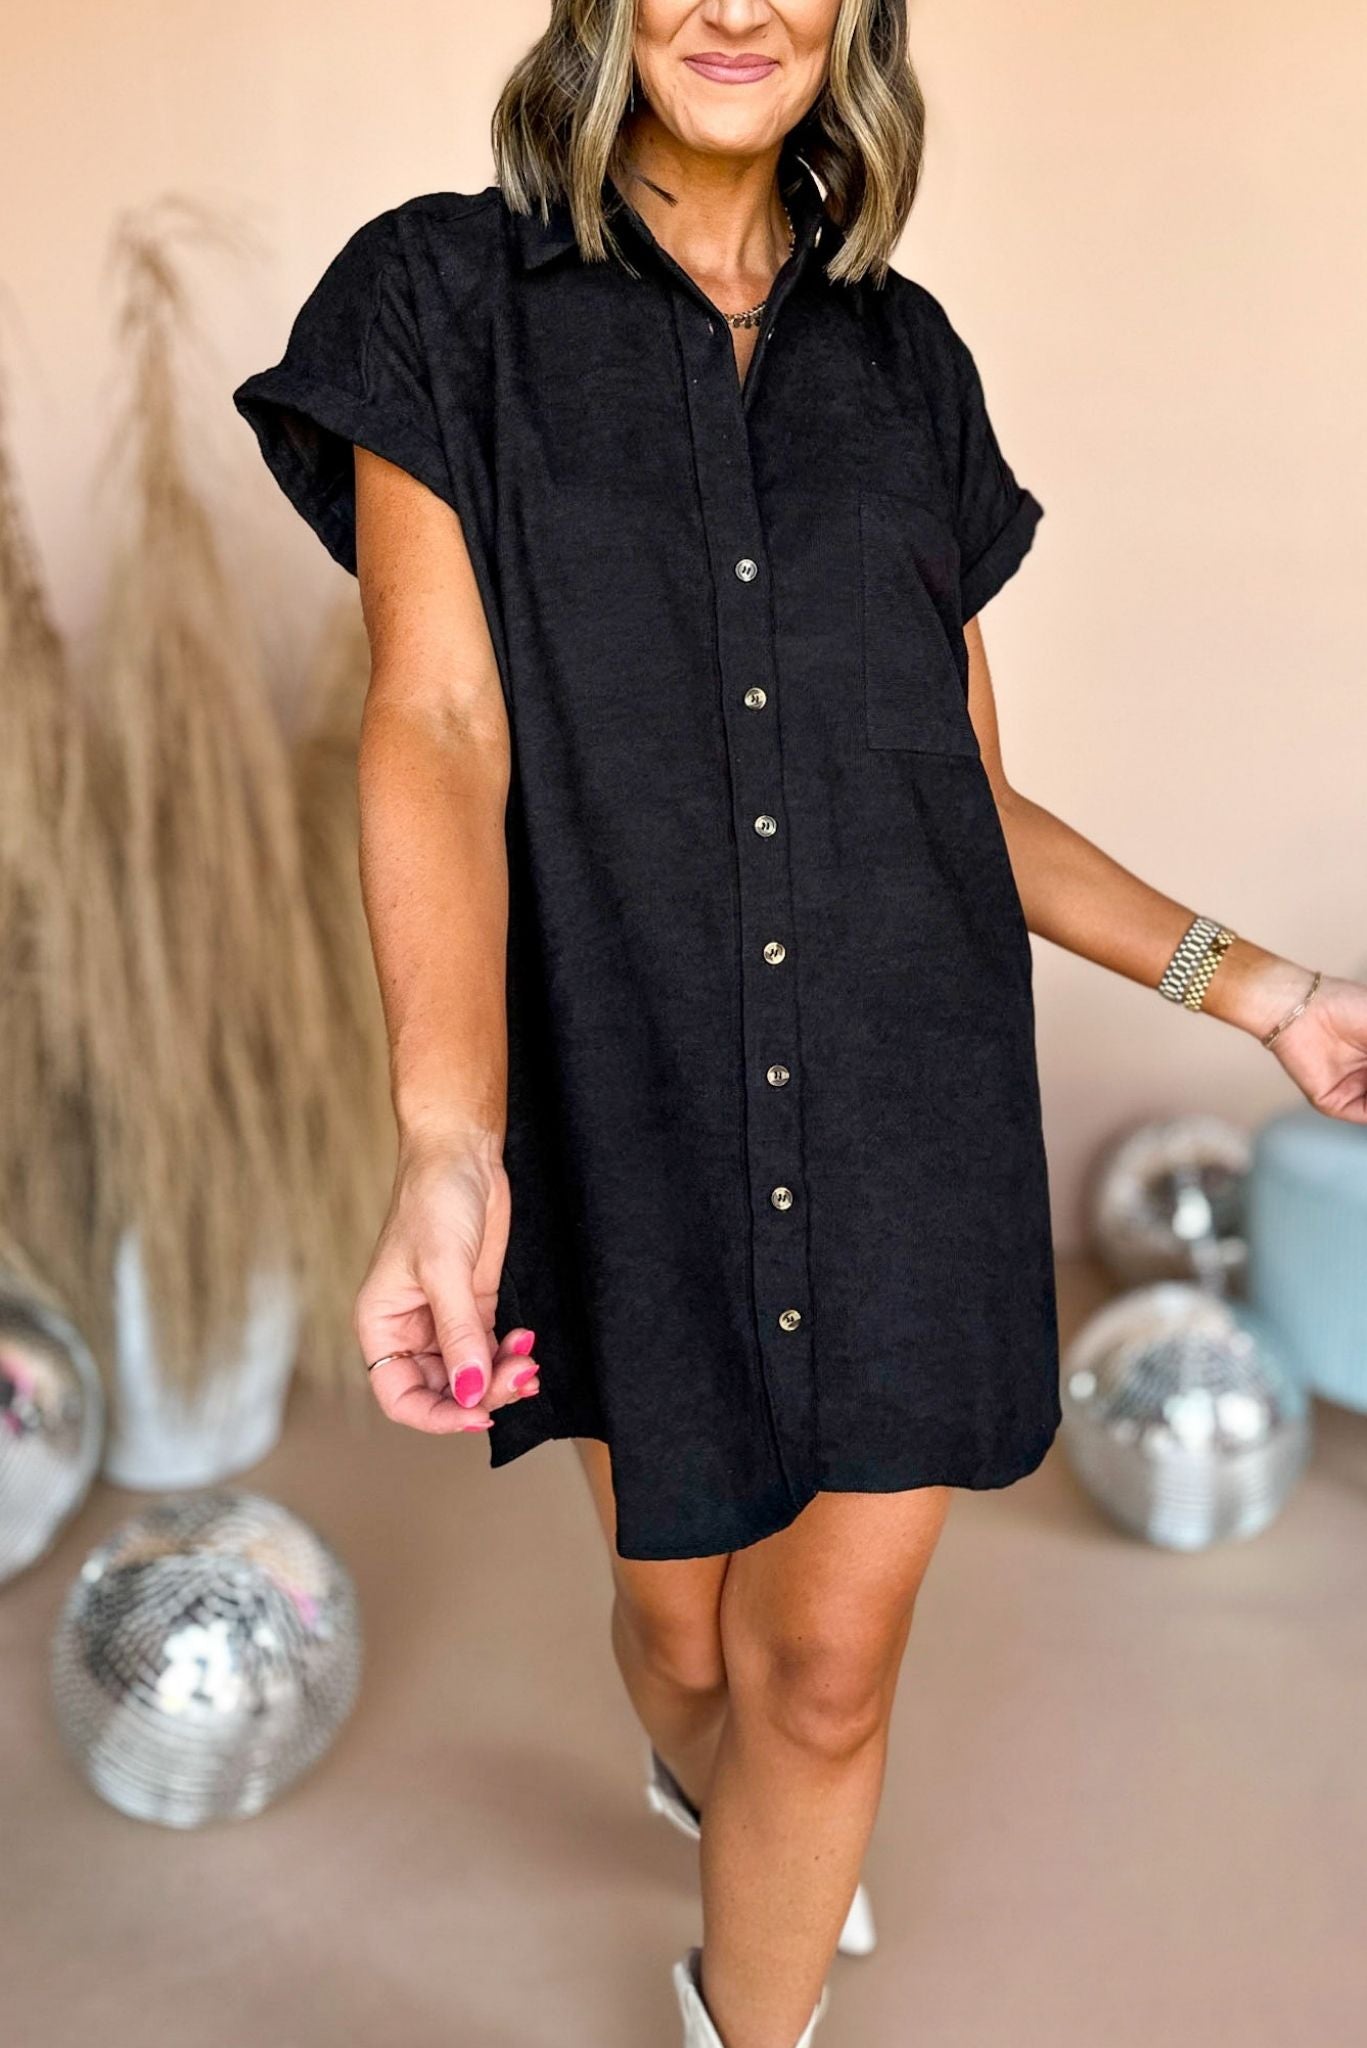  Black Corduroy Pocket Detail Button Down Dress, mom style, mom chic, carpool chic, fall style, summer to fall, elevated style, must have dress, must have fall, shop style your senses by mallory fitzsimmons